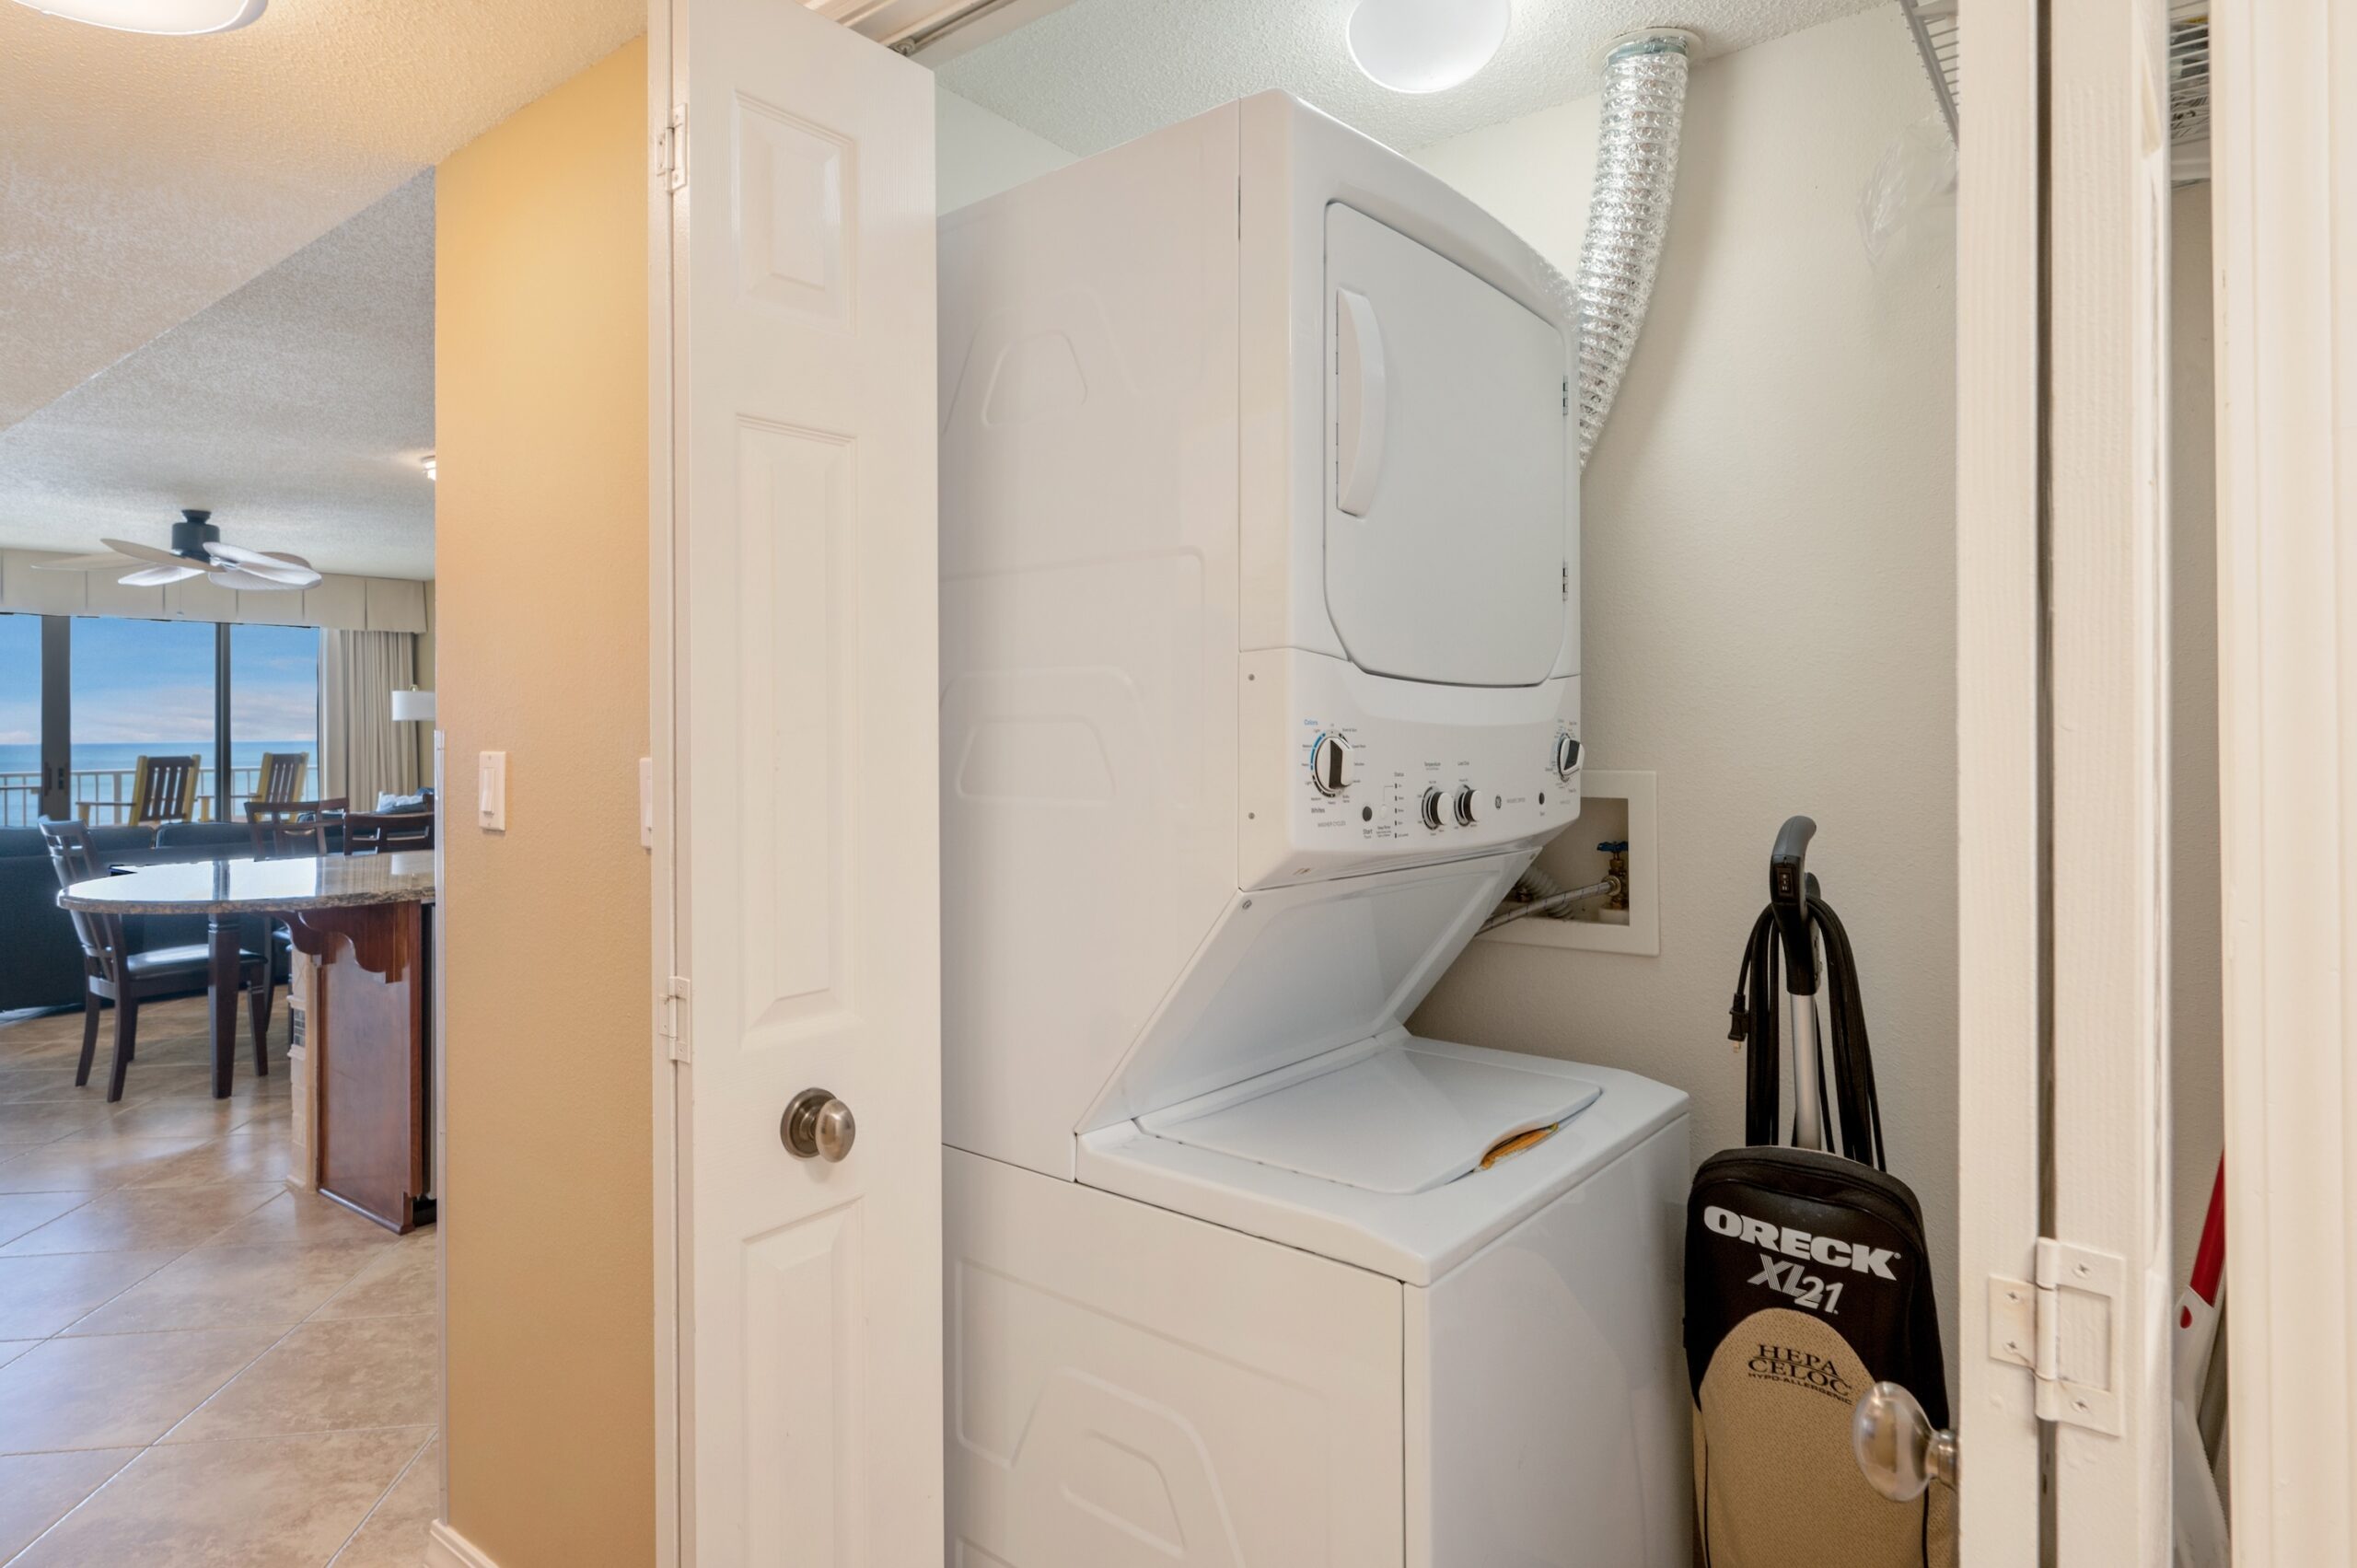 Washer-dryer in the hall closet of our three bedroom Island Princess 615 beach condo